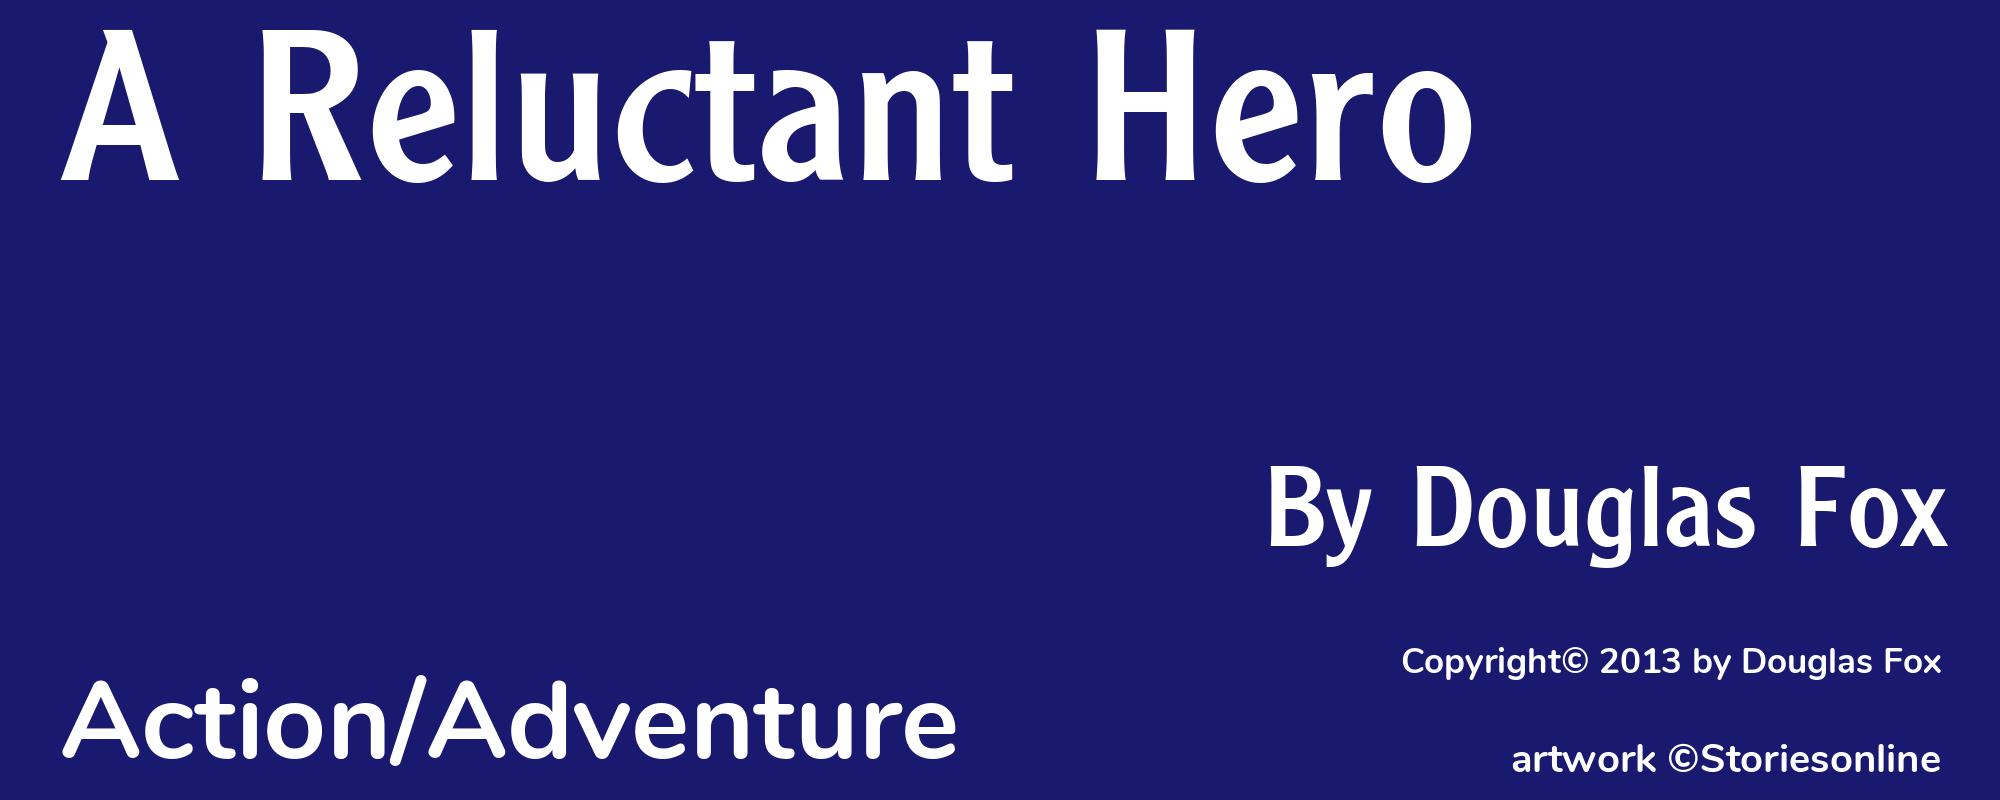 A Reluctant Hero - Cover